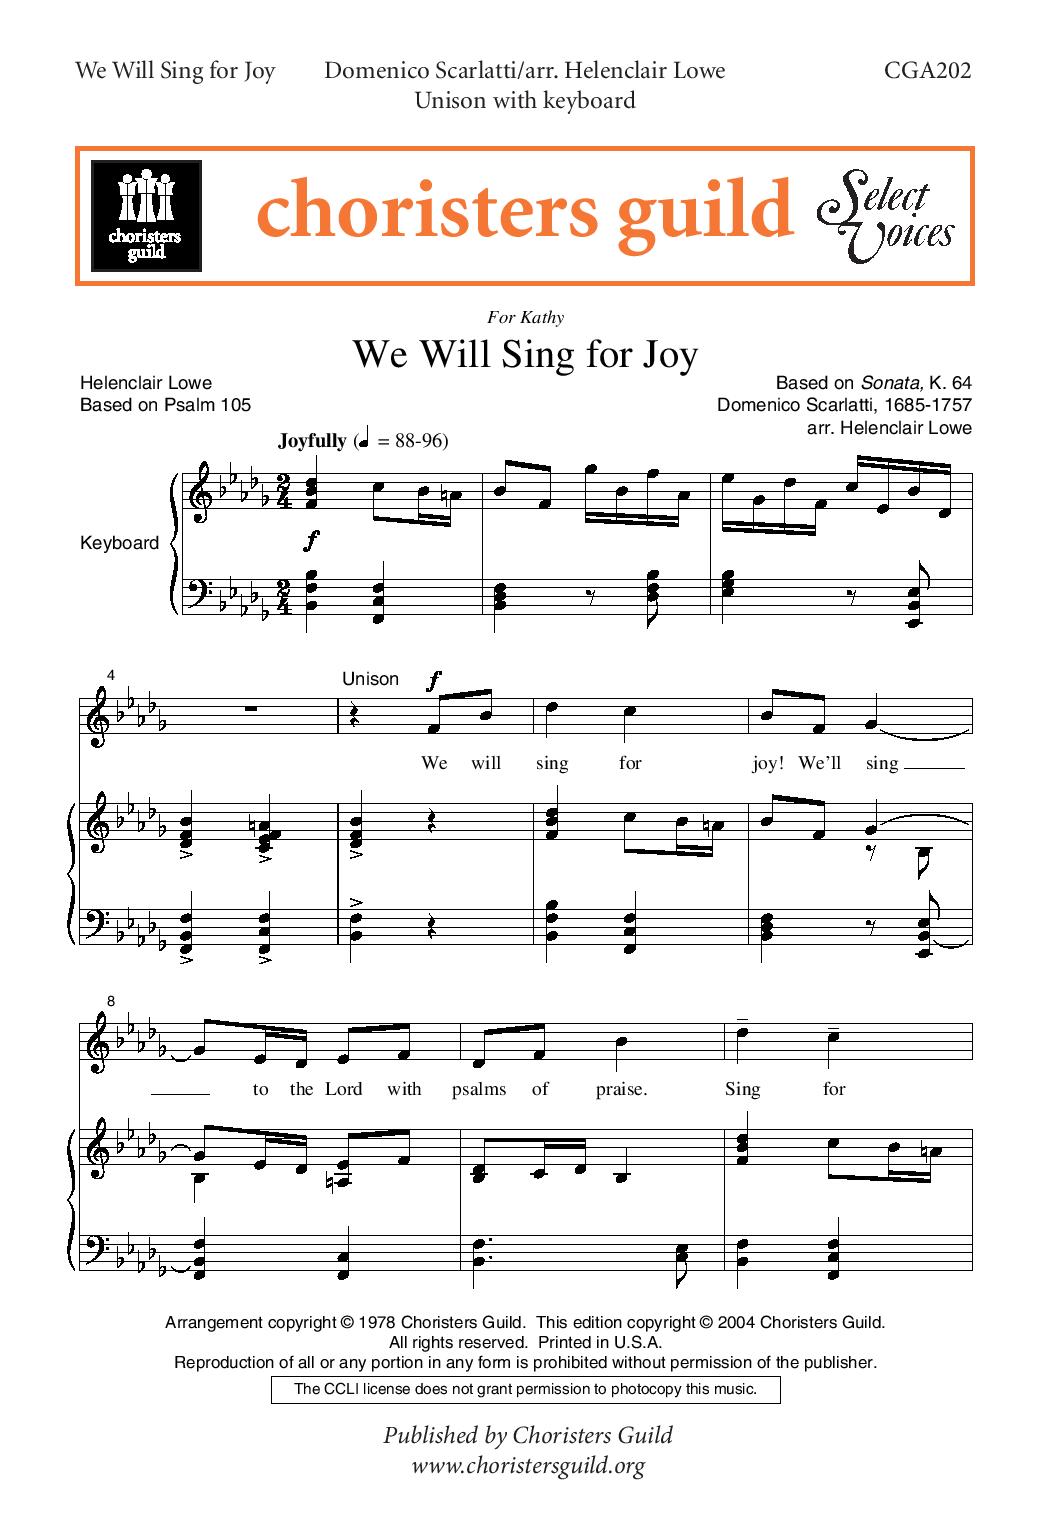 We Will Sing for Joy